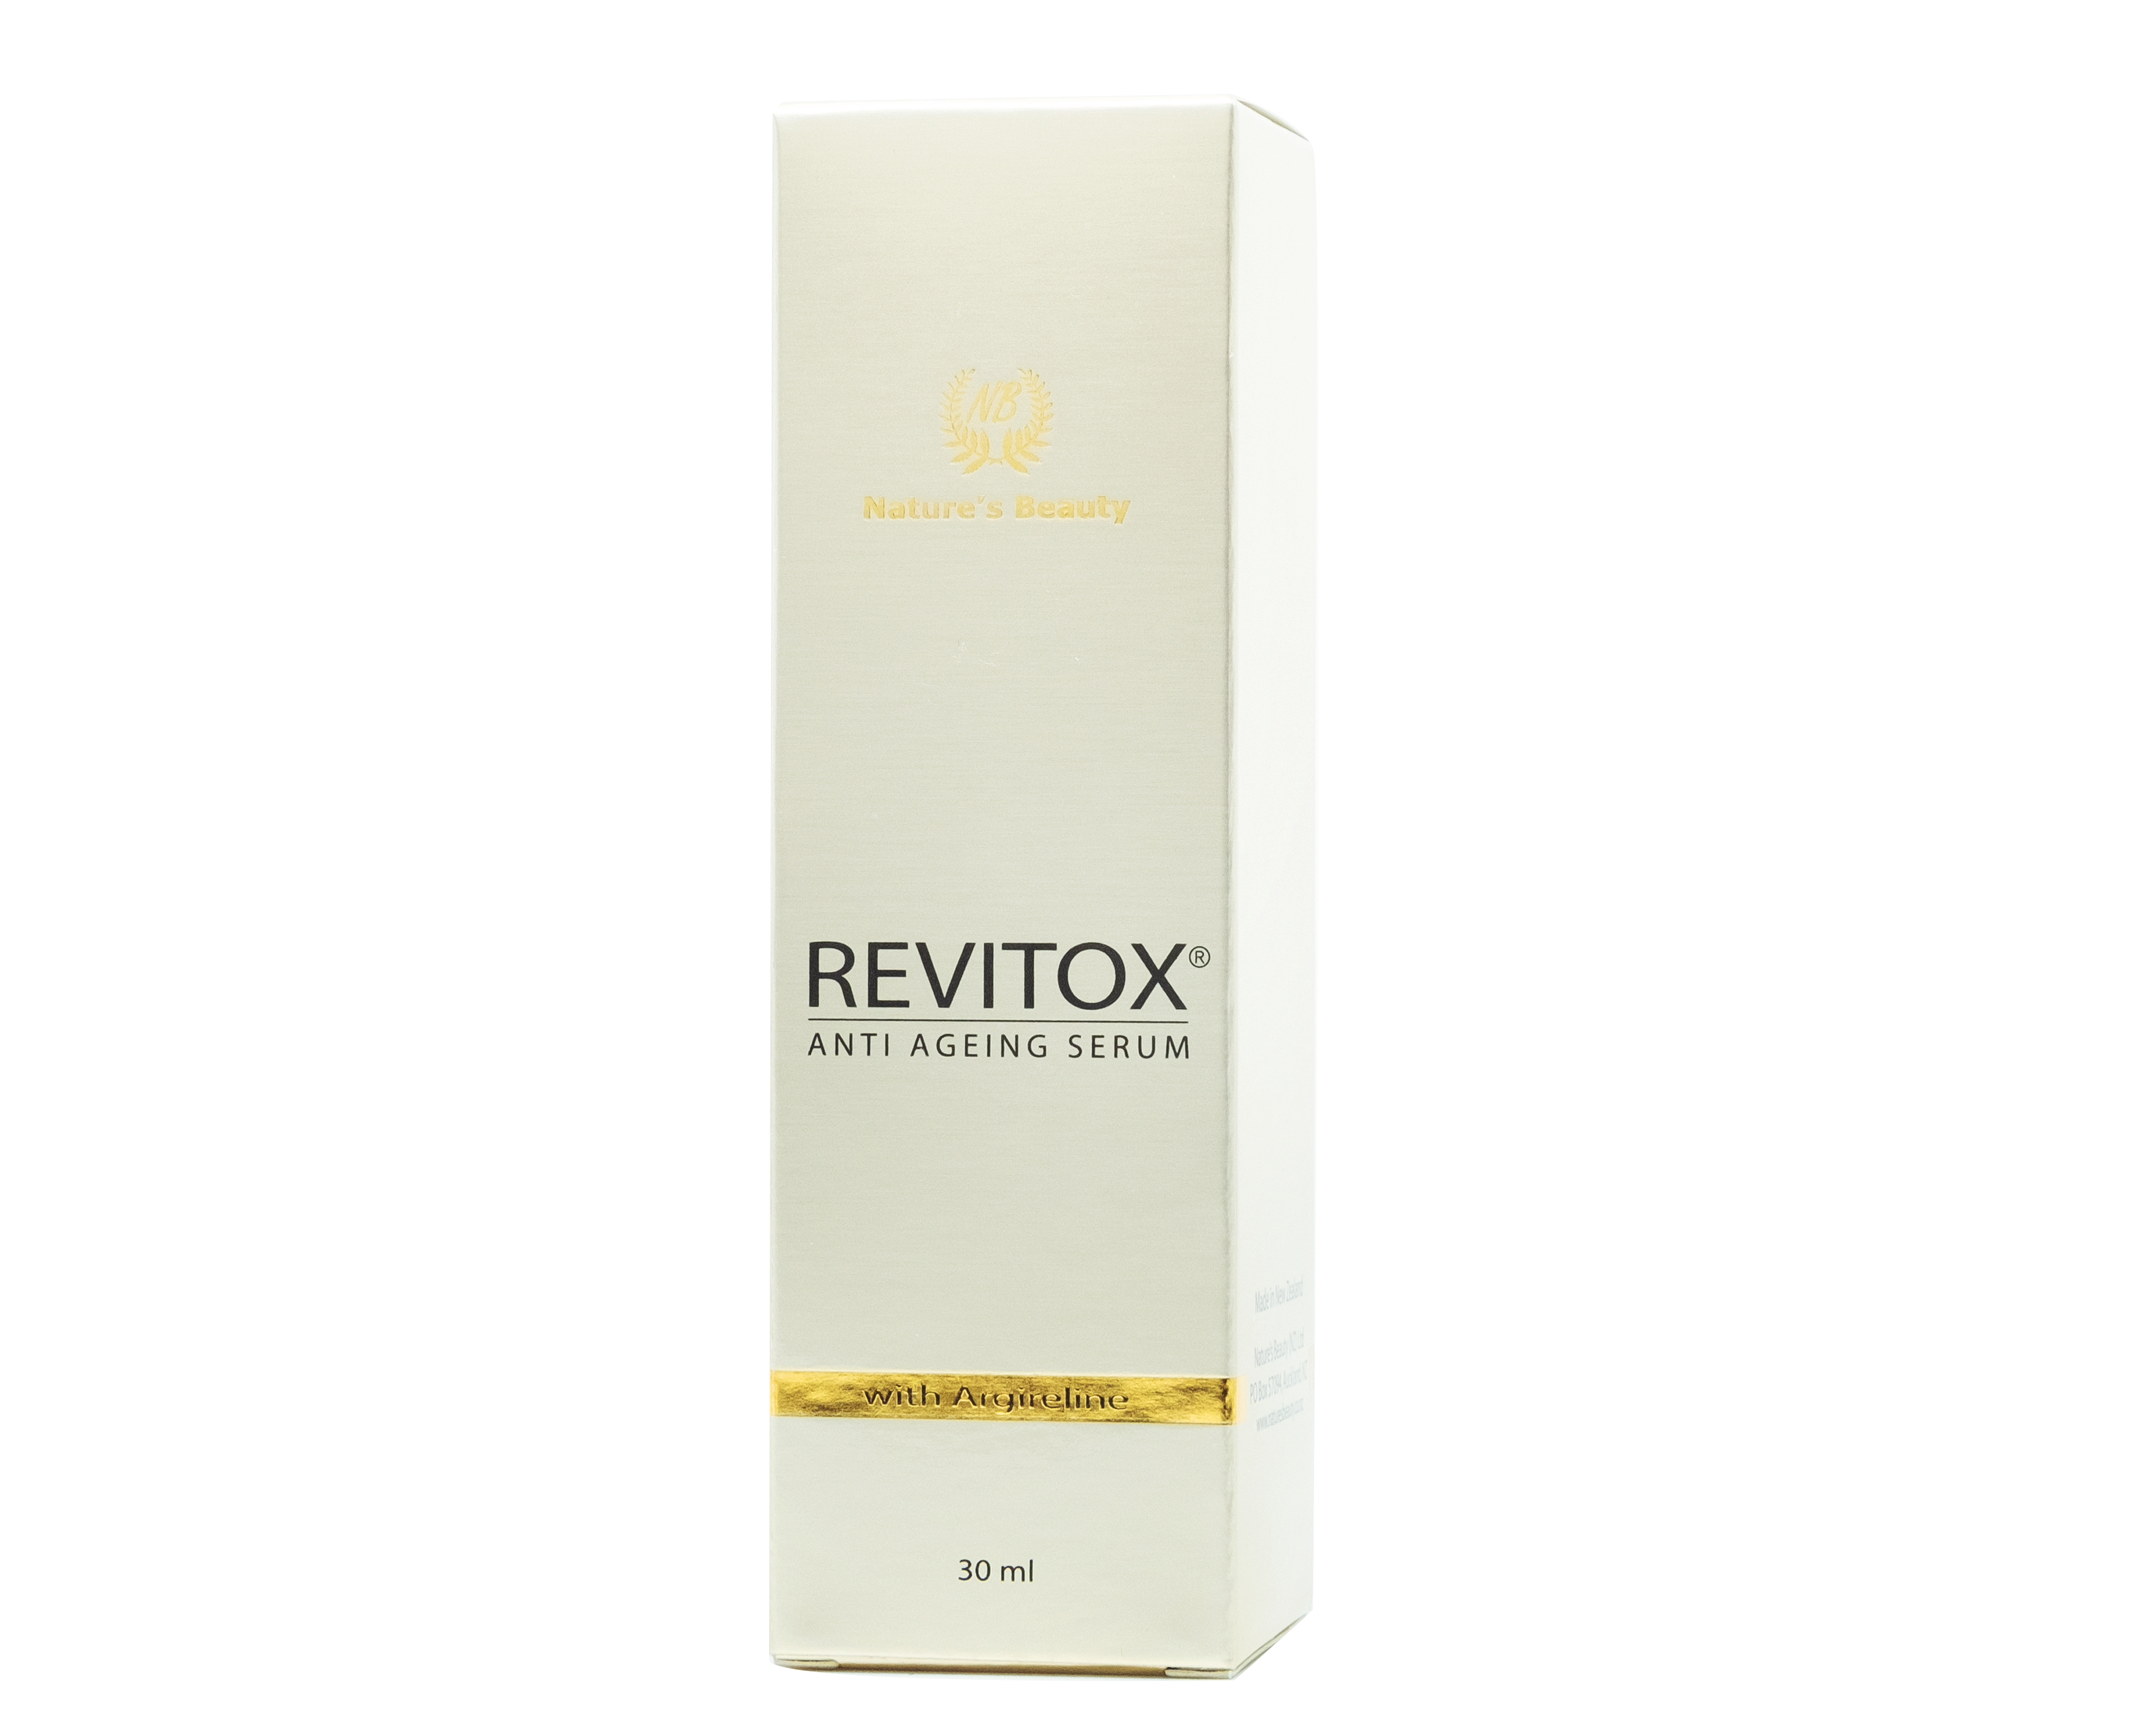 Nature's Beauty Revitox Anti Ageing Serum 30ml - 365 Health Limited